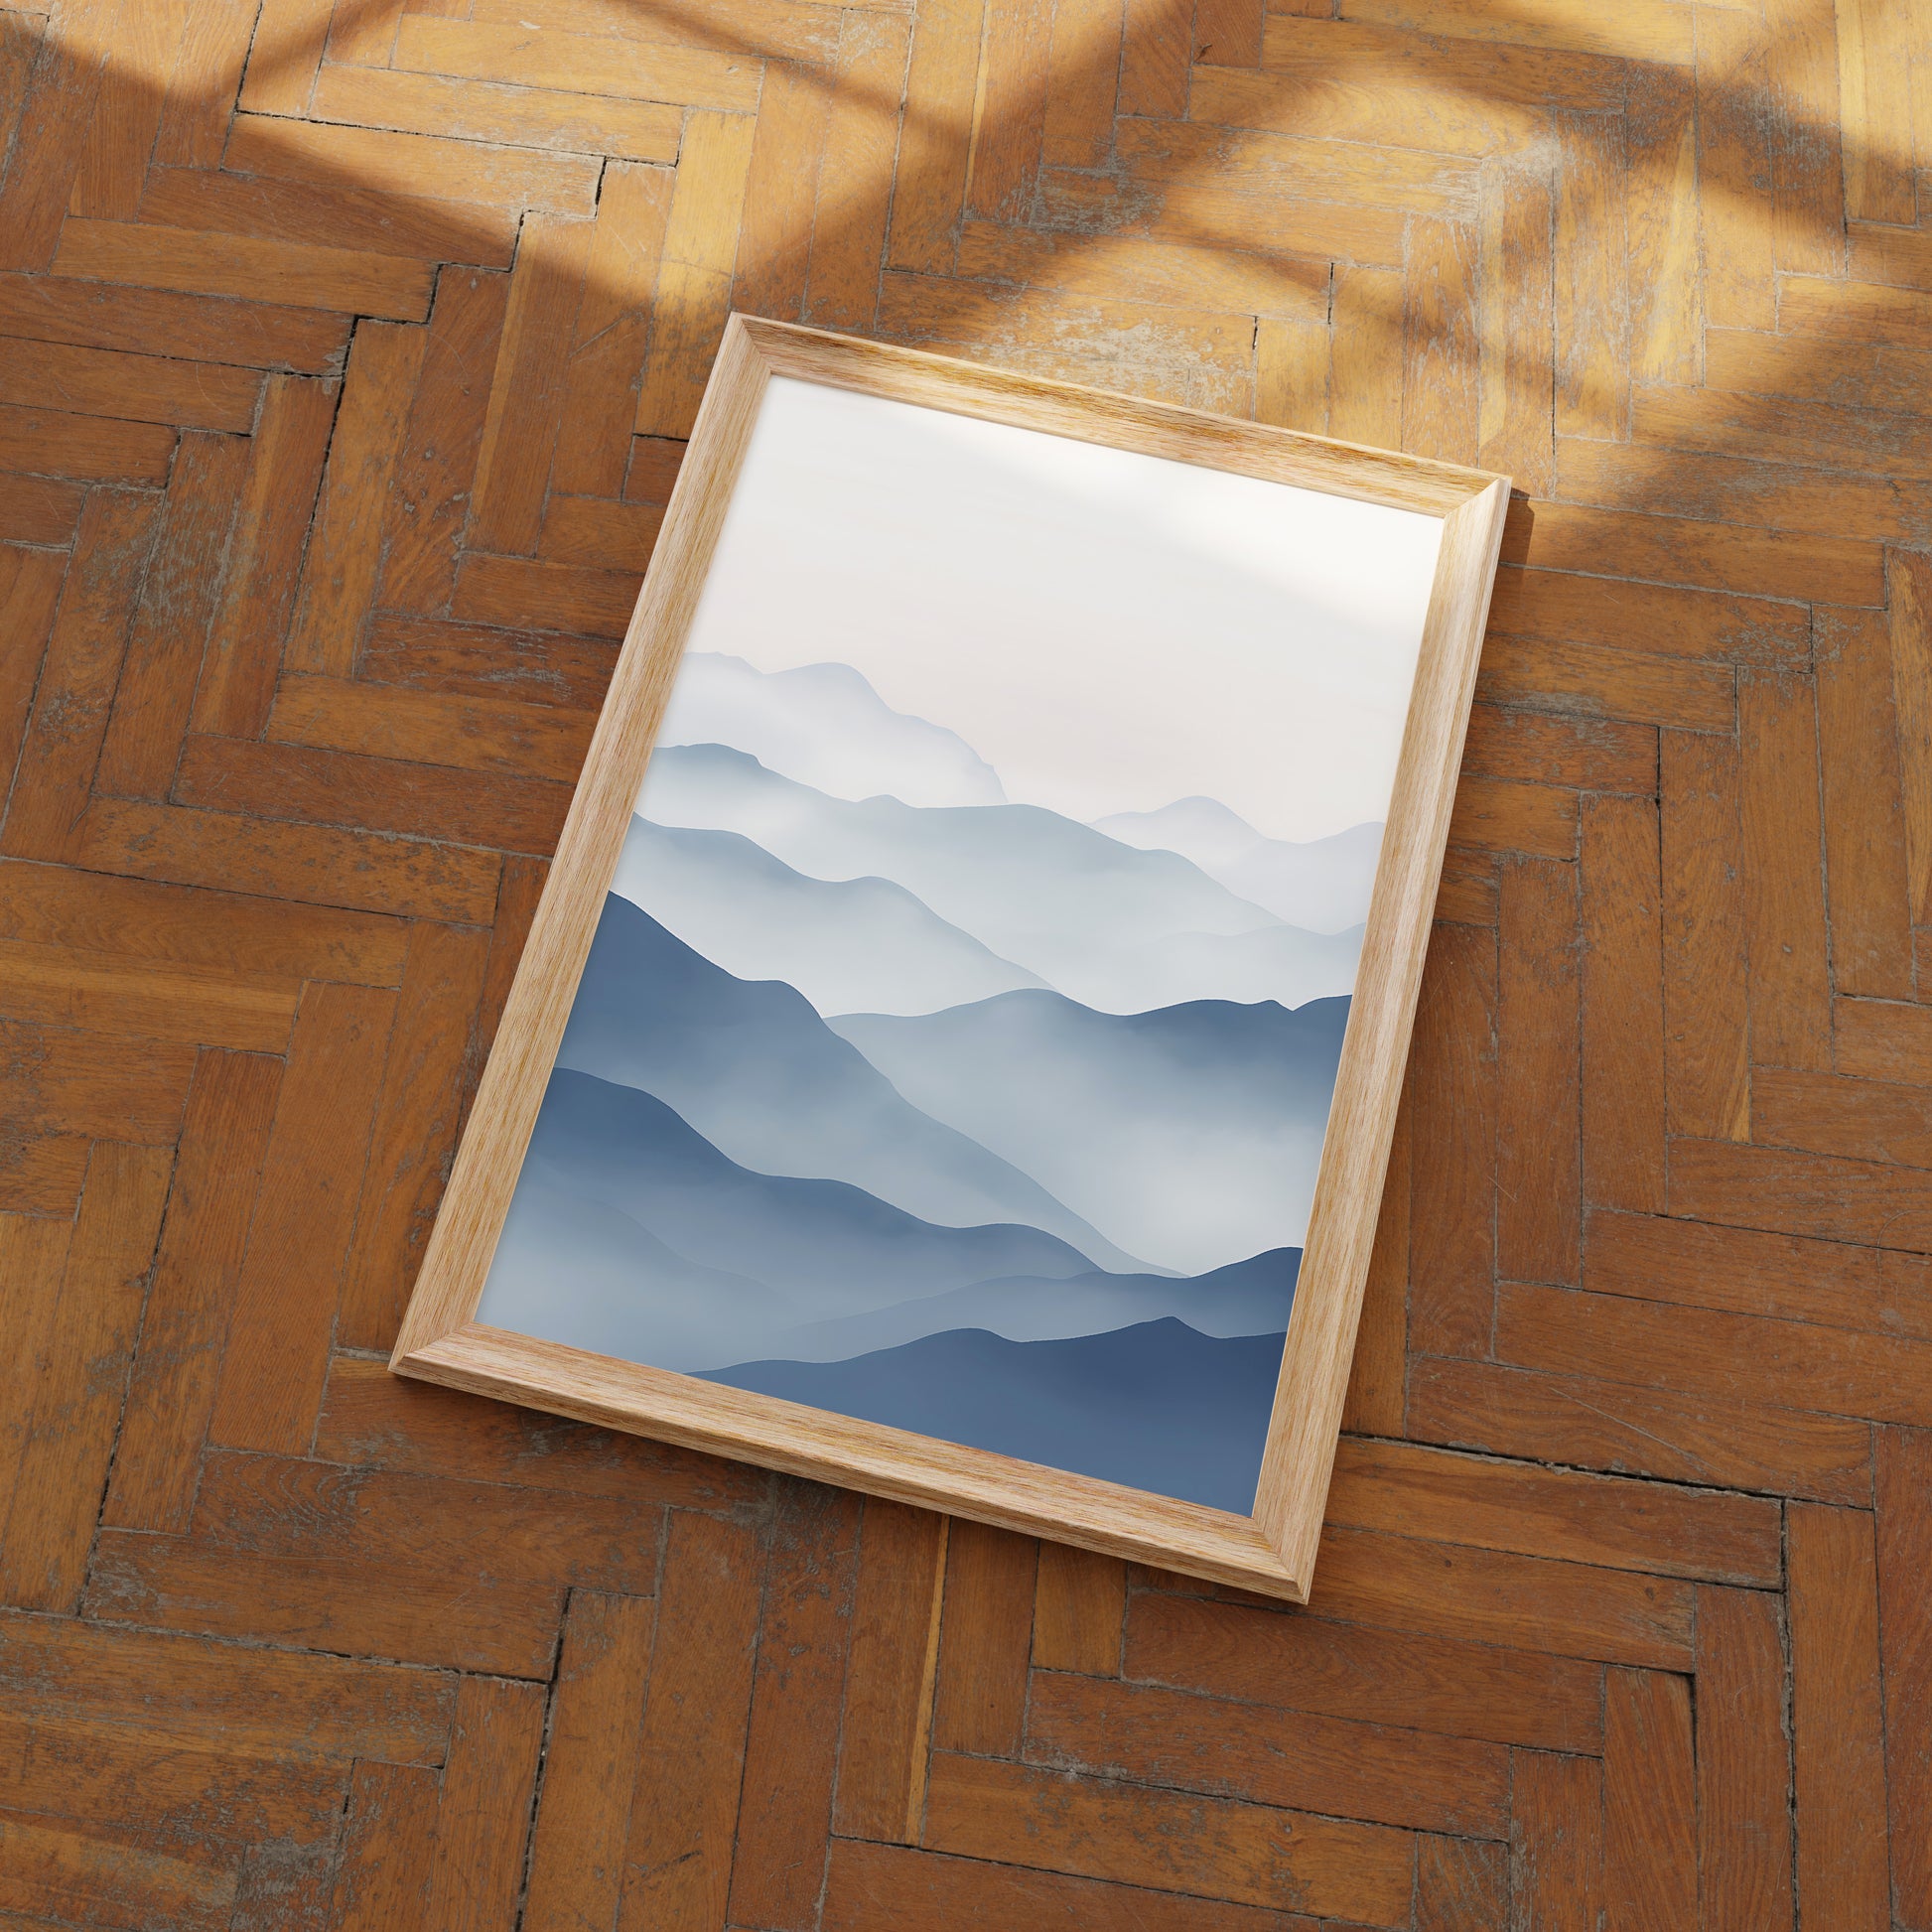 A framed picture of blue mountains on a wooden floor.